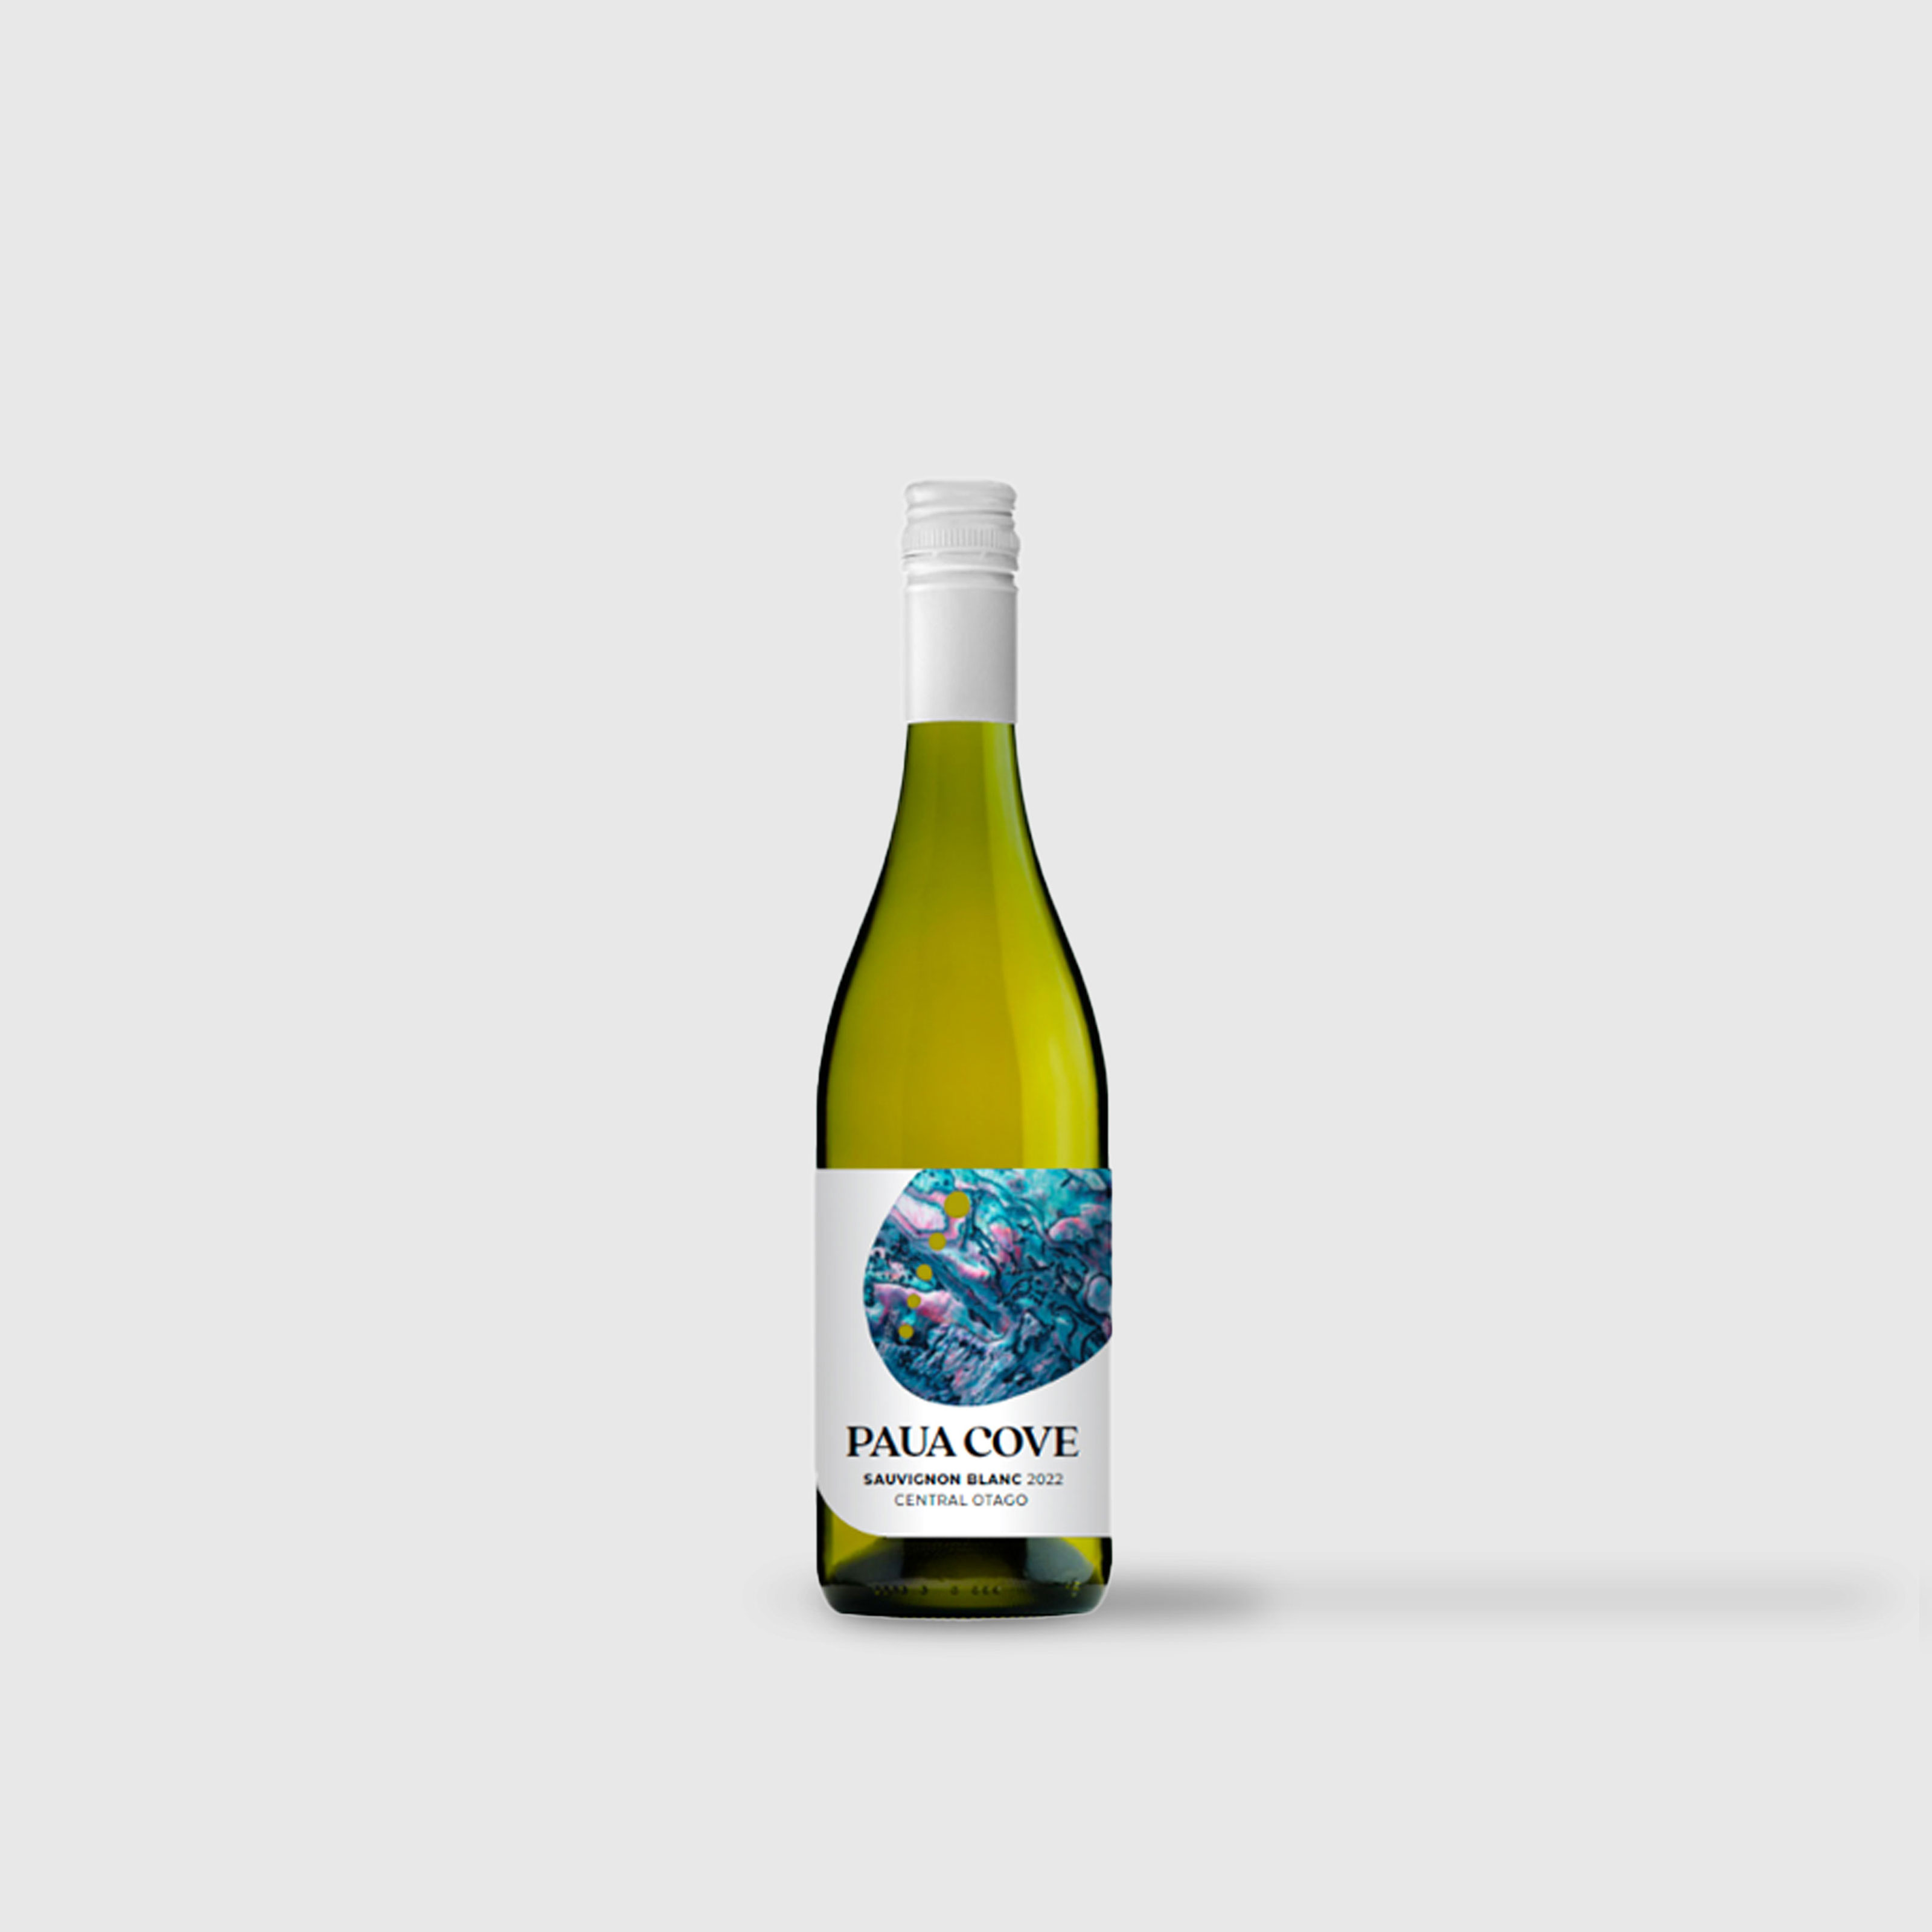 Sacred Hill Yellow Label Chardonnay Buy Now Vine Hawkes at 2022 - - Bay Online Vineonline NZ